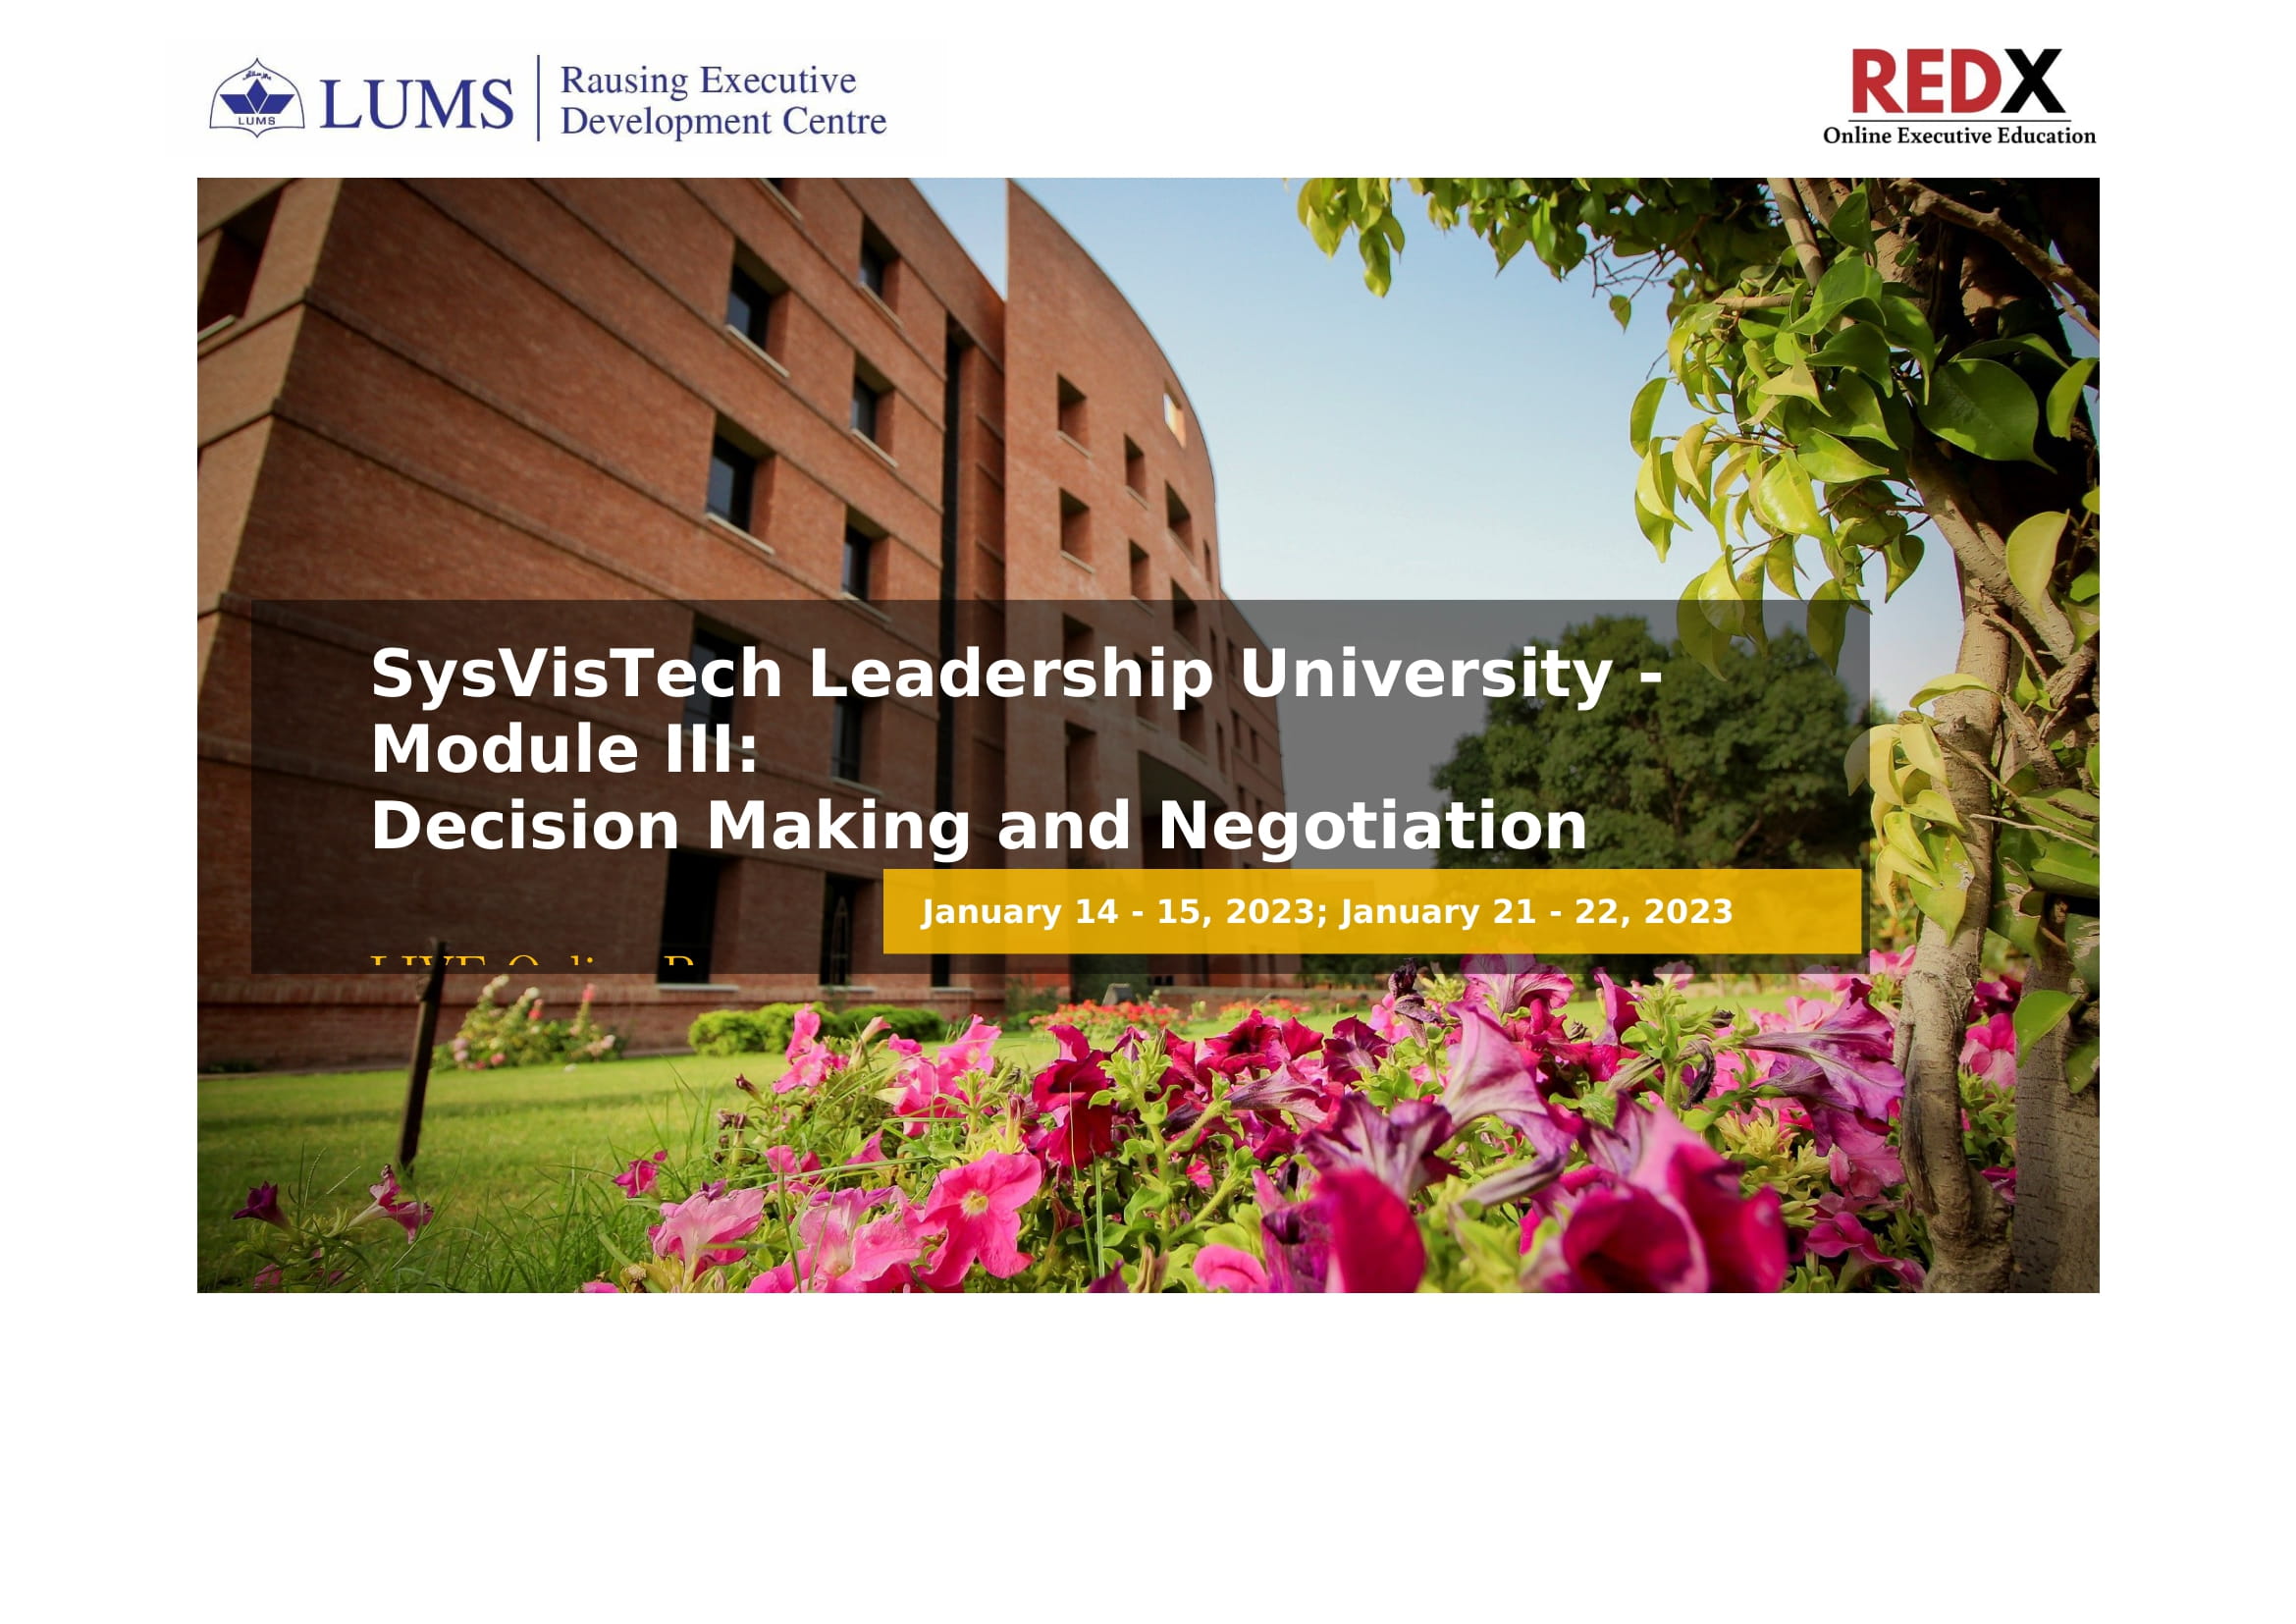 SysVisTech Leadership University - Module 3: Decision Making and Negotiation